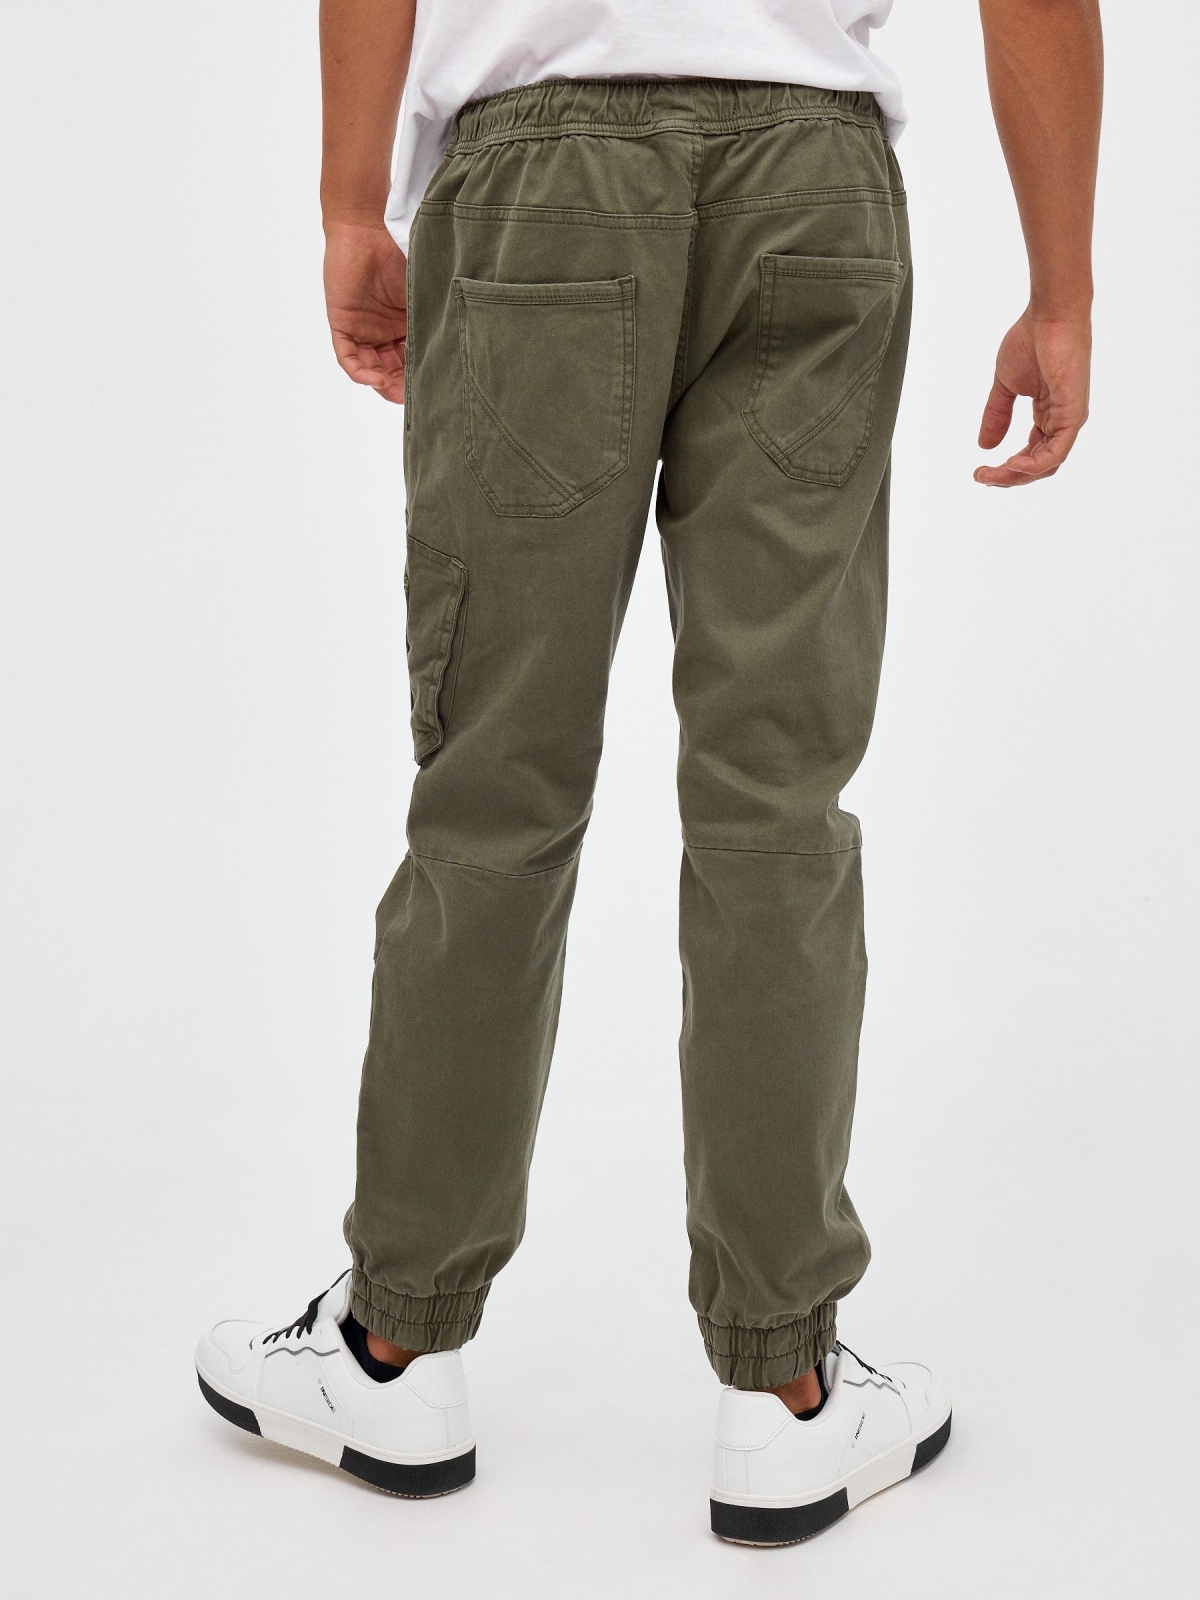 Closed pocket jogger pants green middle back view